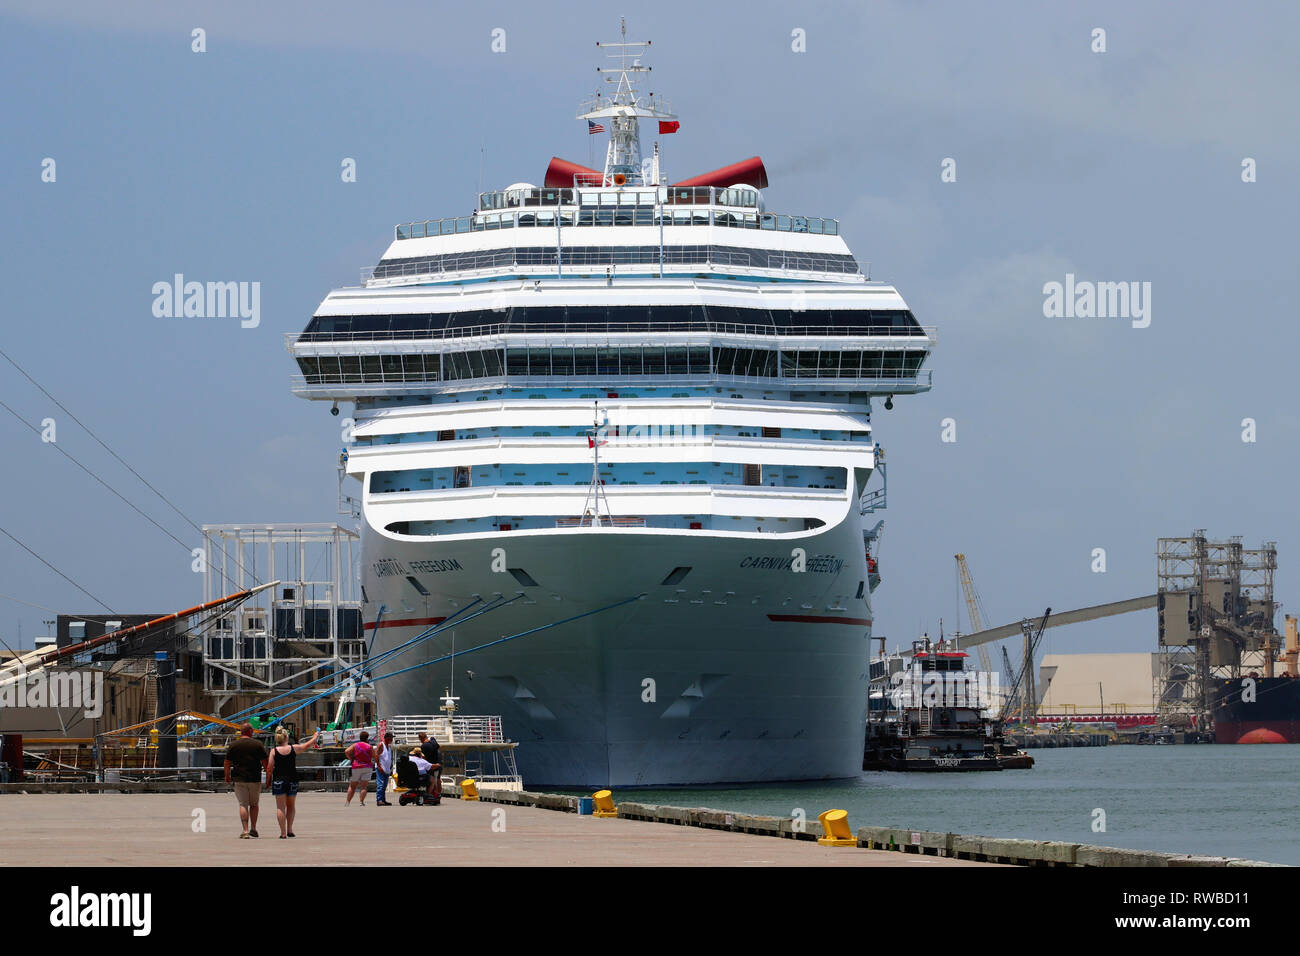 GALVESTON, TEXAS, USA - JUNE 9, 2018: Carnival Freedom cruise ship, operated by Carnival Cruise Line, docked in Port of Galveston, Texas. Stock Photo